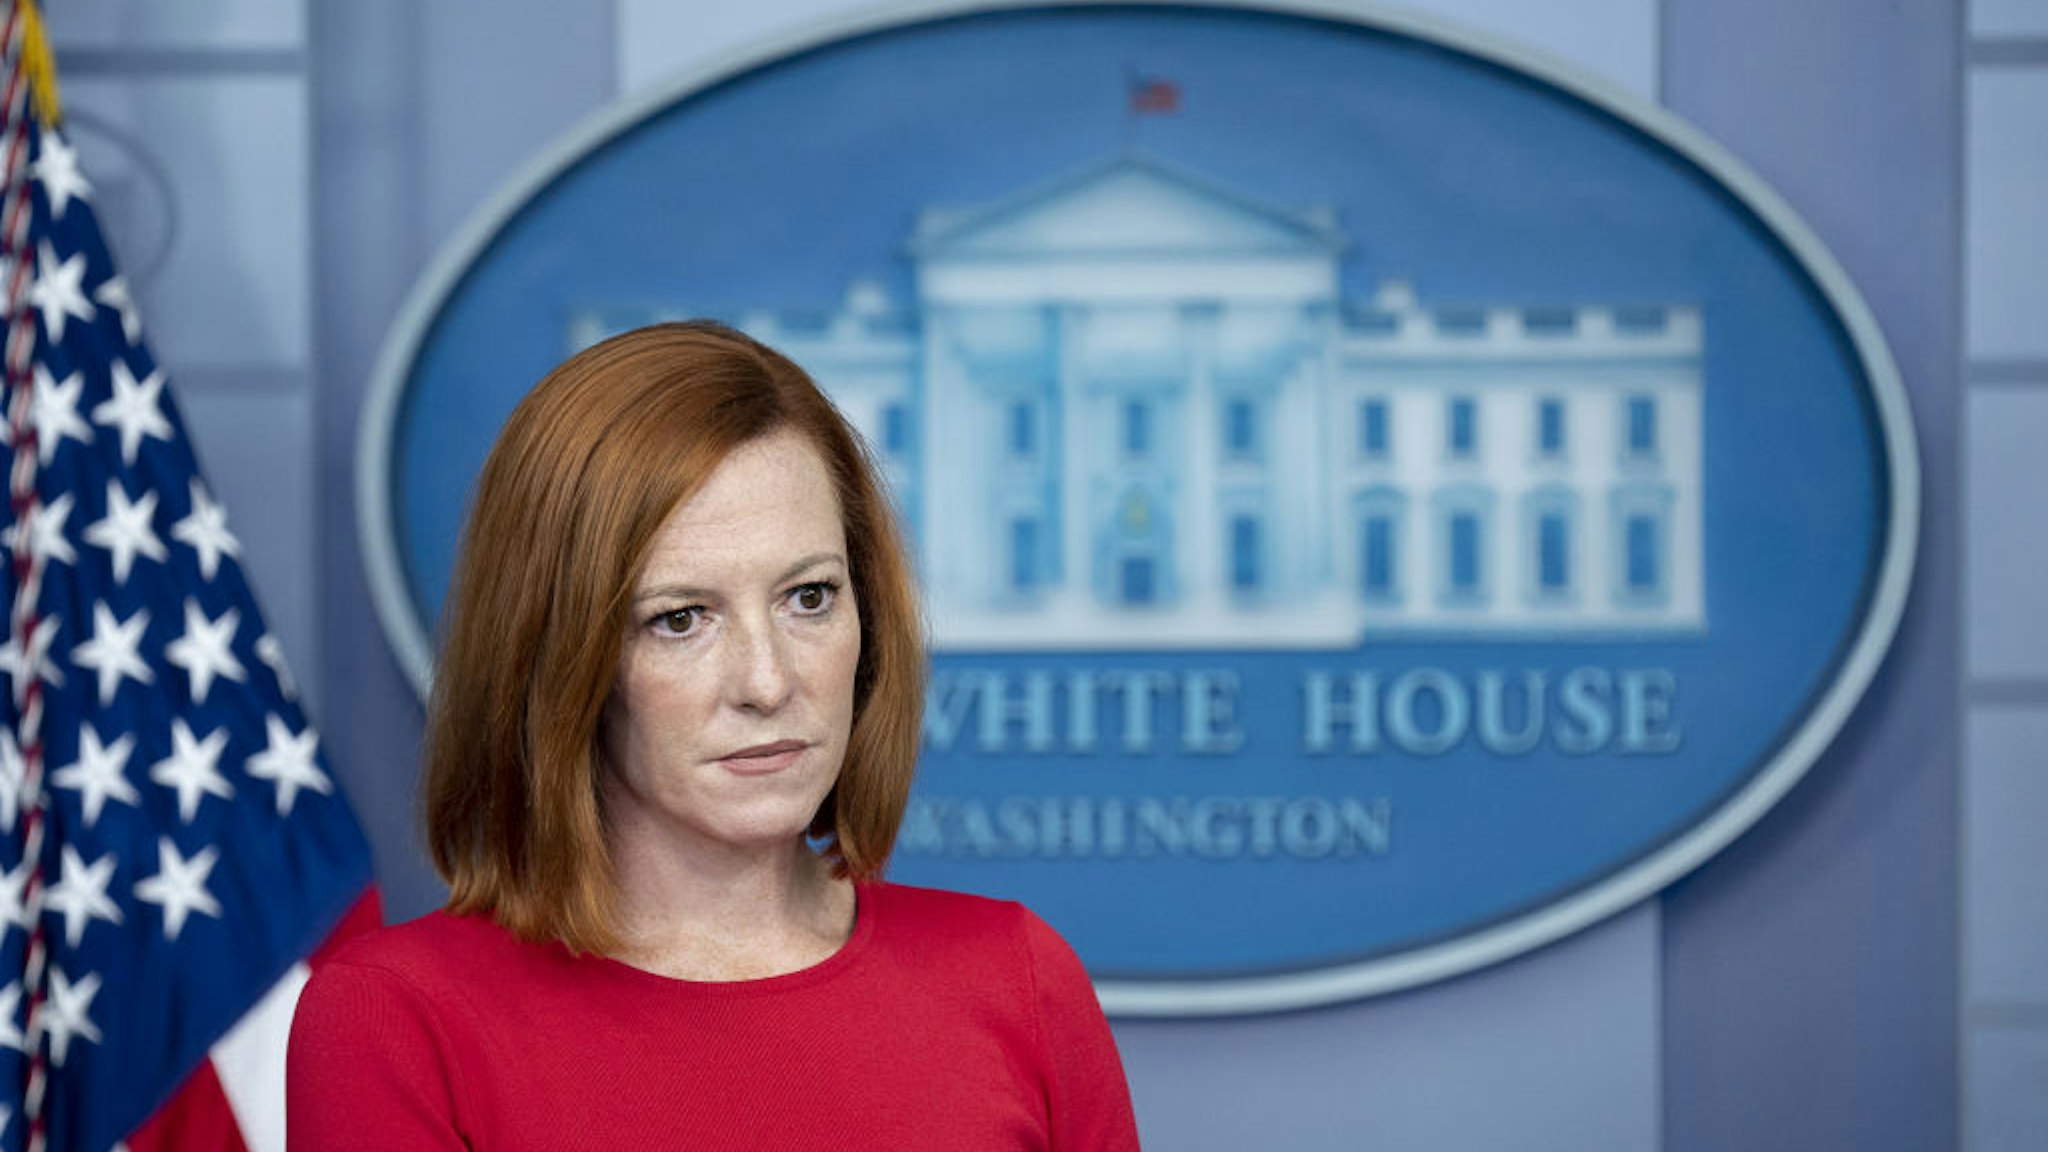 Jen Psaki, White House press secretary, pauses during a news conference in the James S. Brady Press Briefing Room at the White House in Washington, D.C., U.S., on Wednesday, Aug. 25, 2021